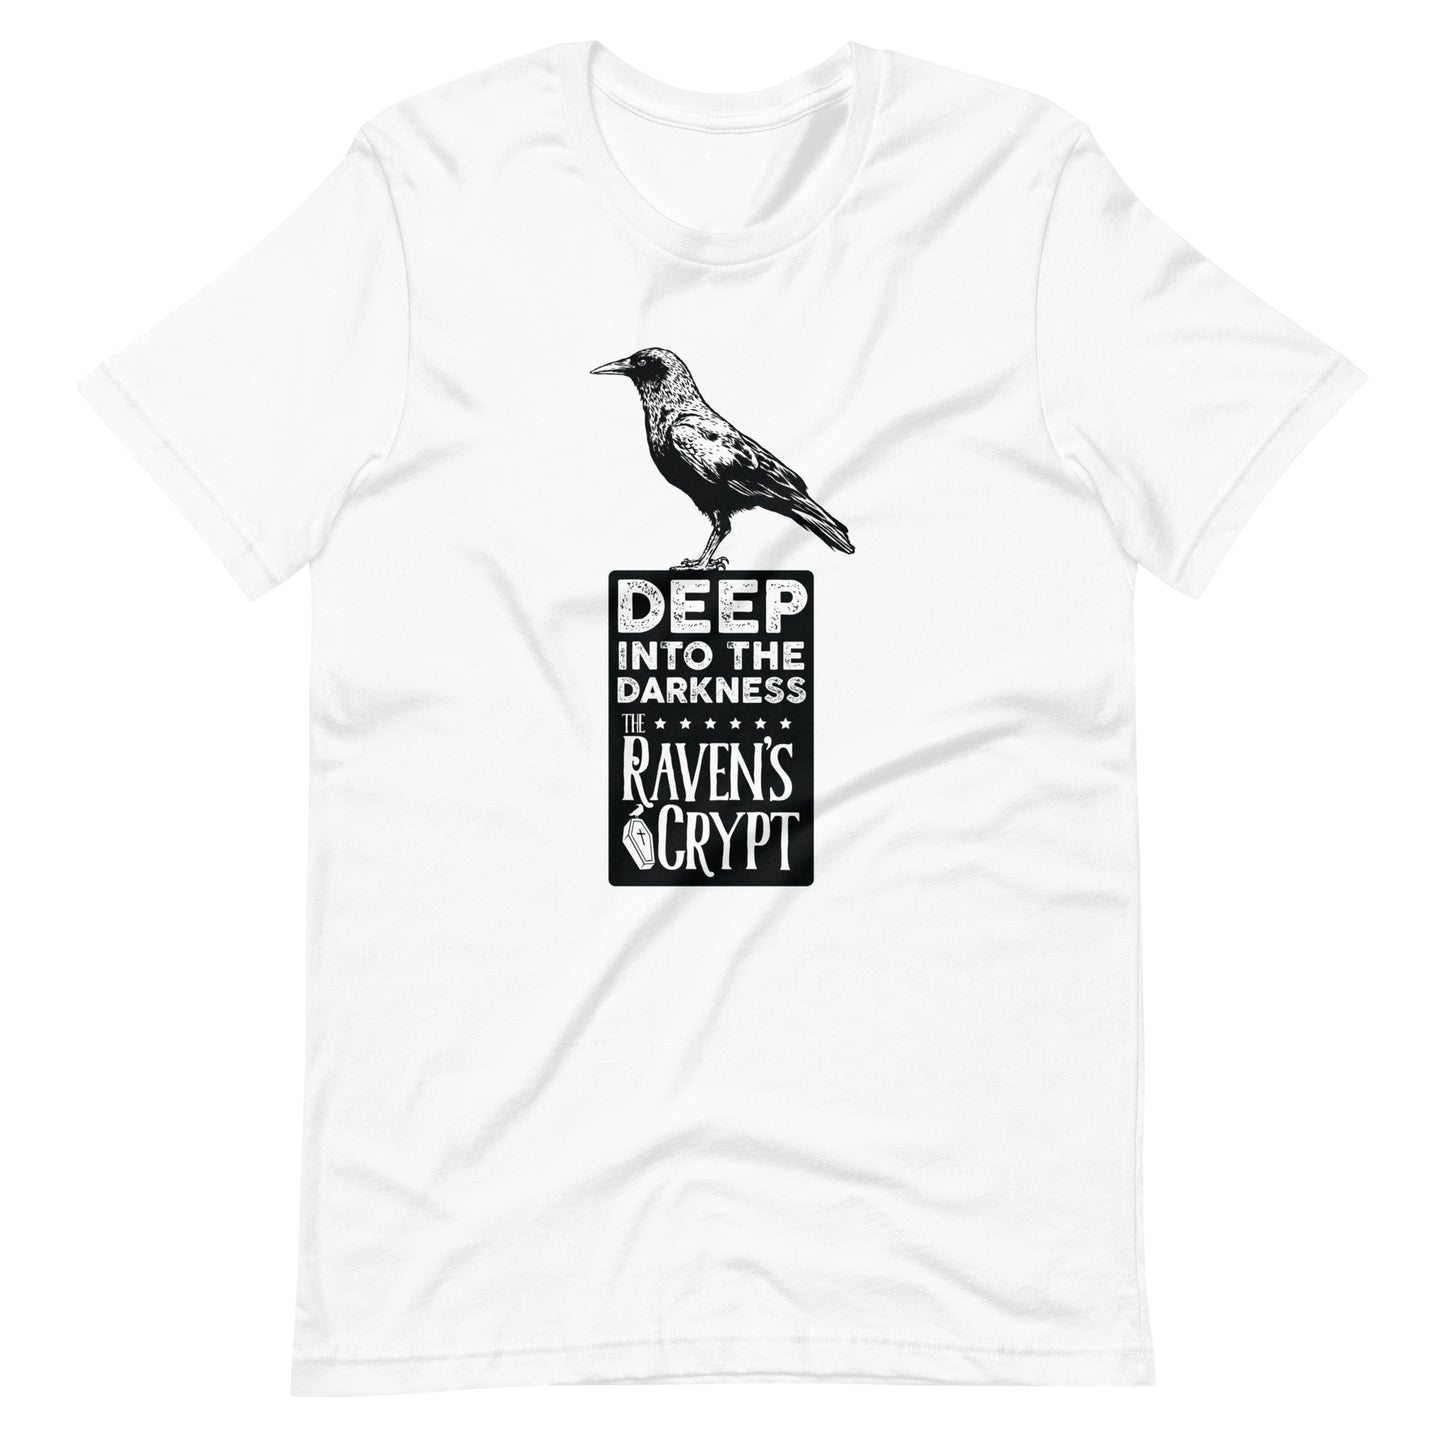 Deep Into the Darkness Crypt 2 - Men's t-shirt - White Front